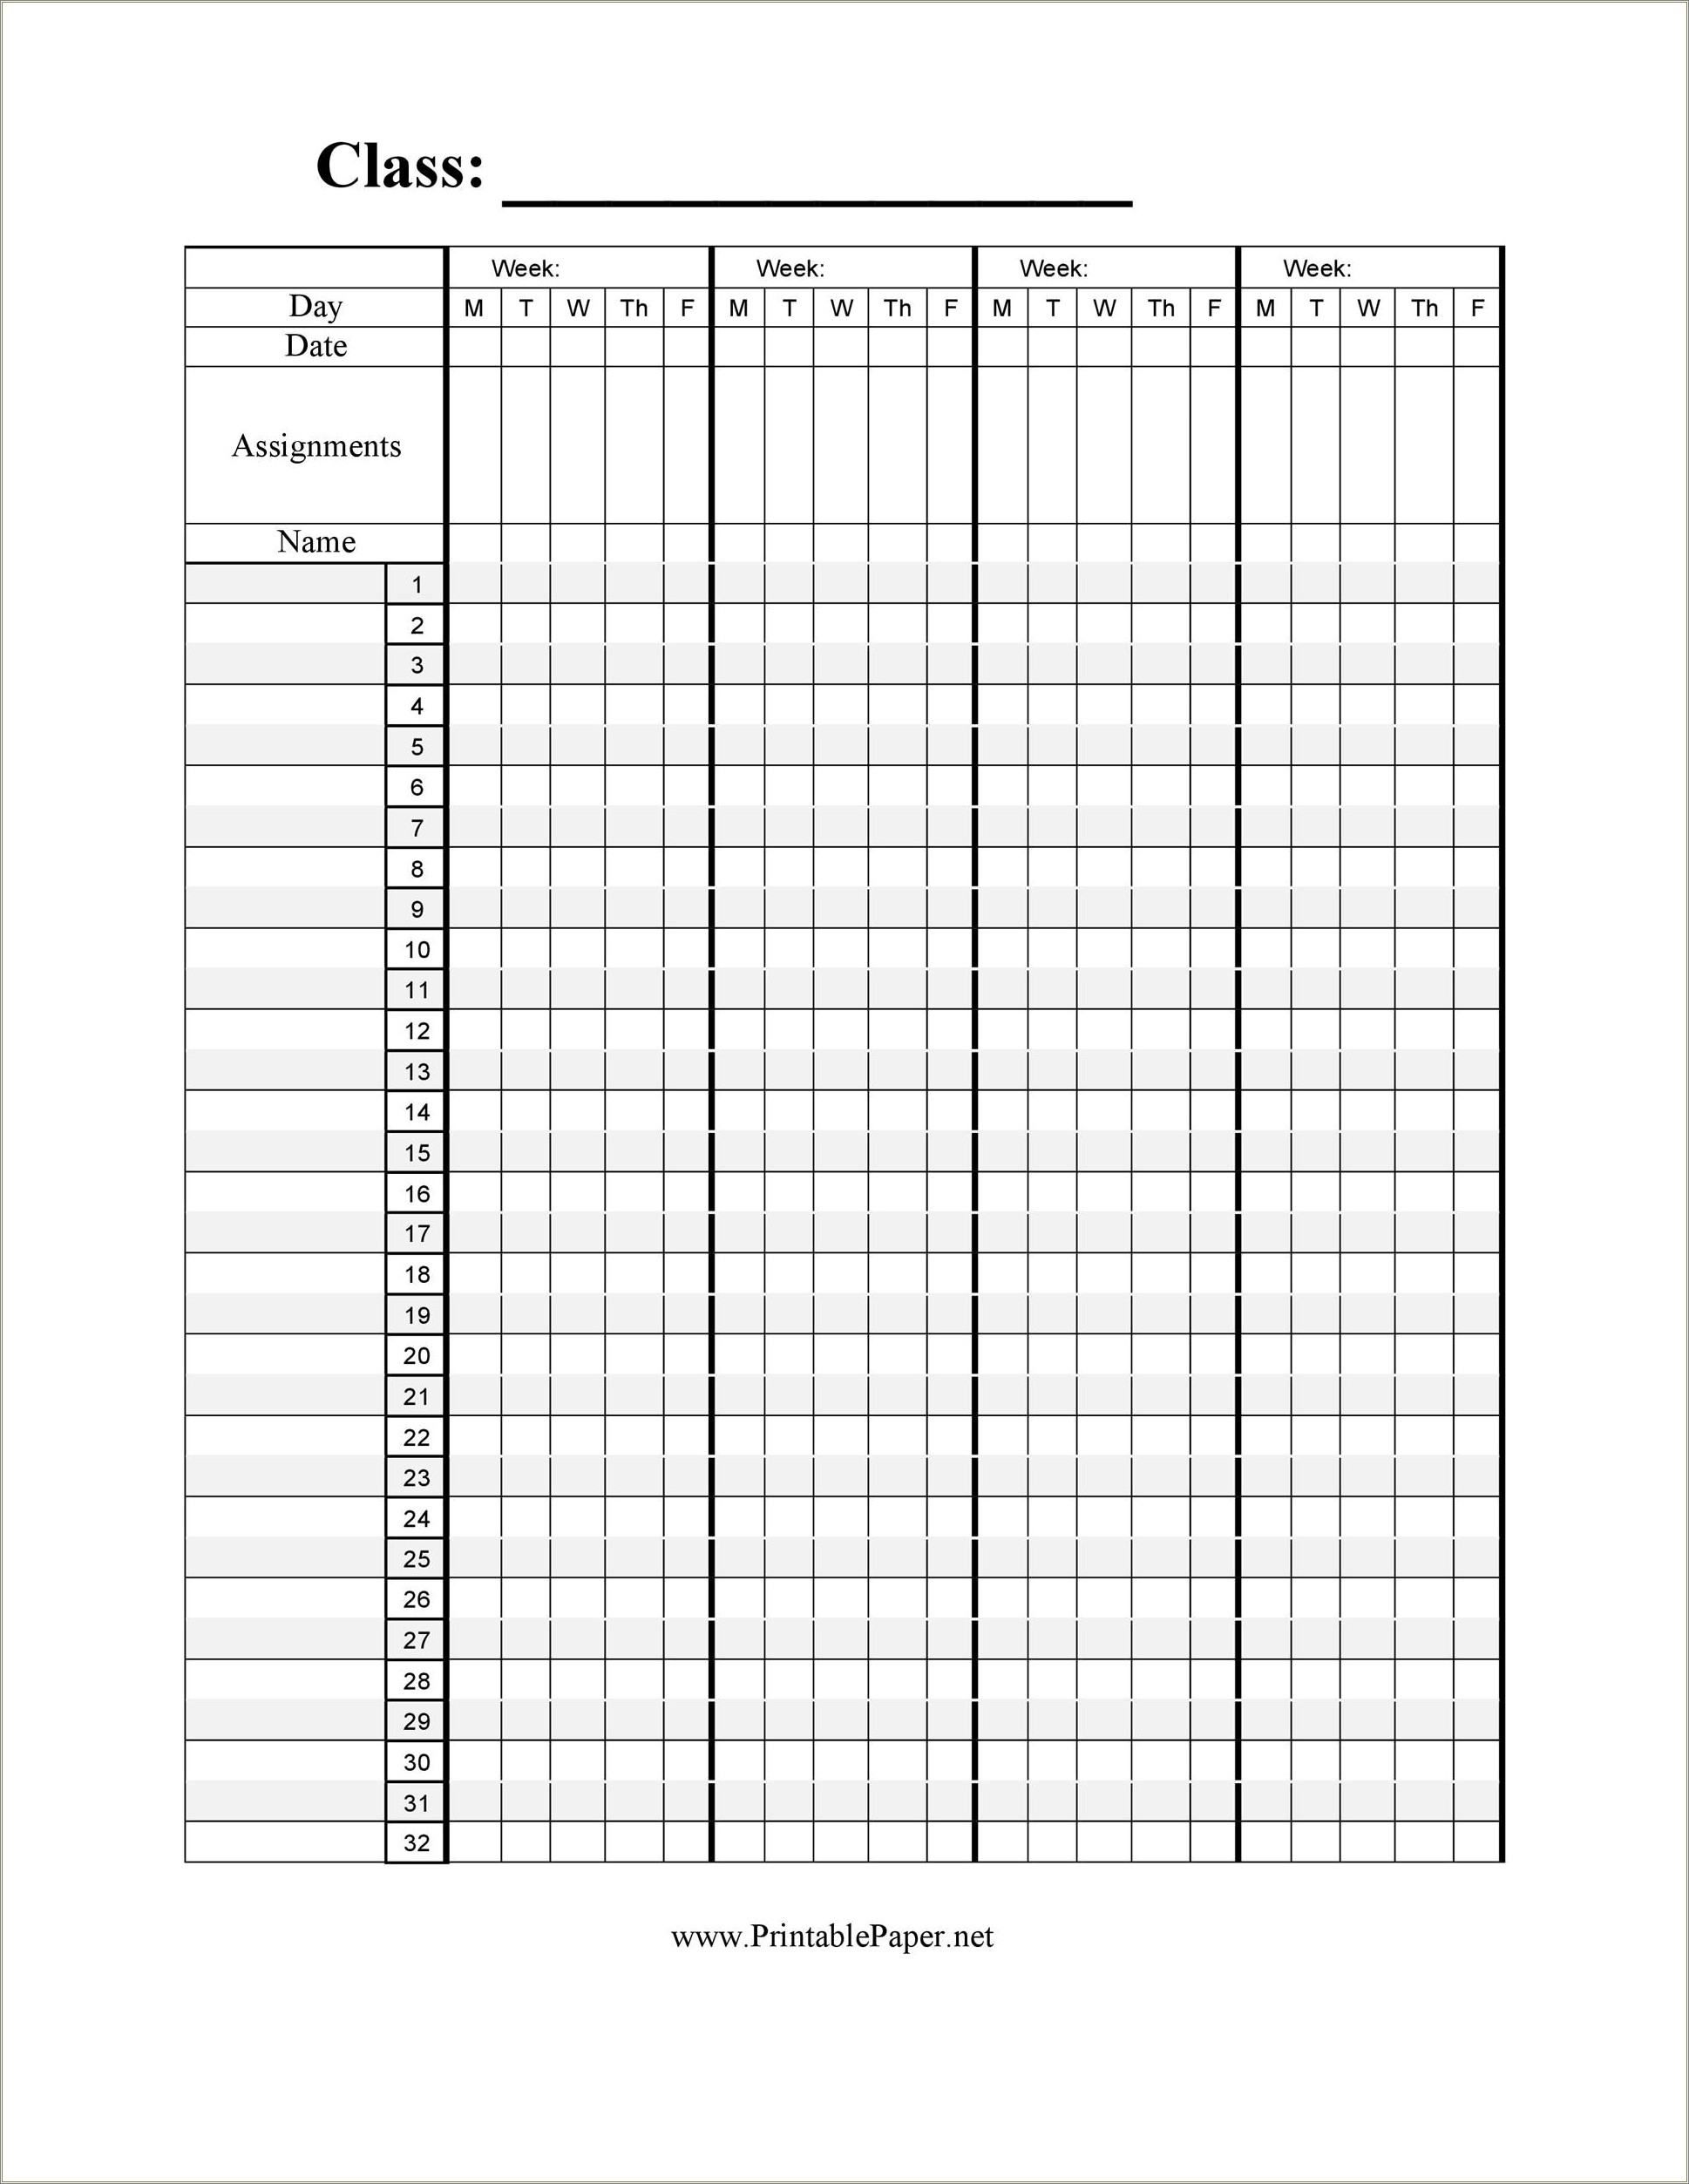 Free Decorative Classroom Roster Templates Free